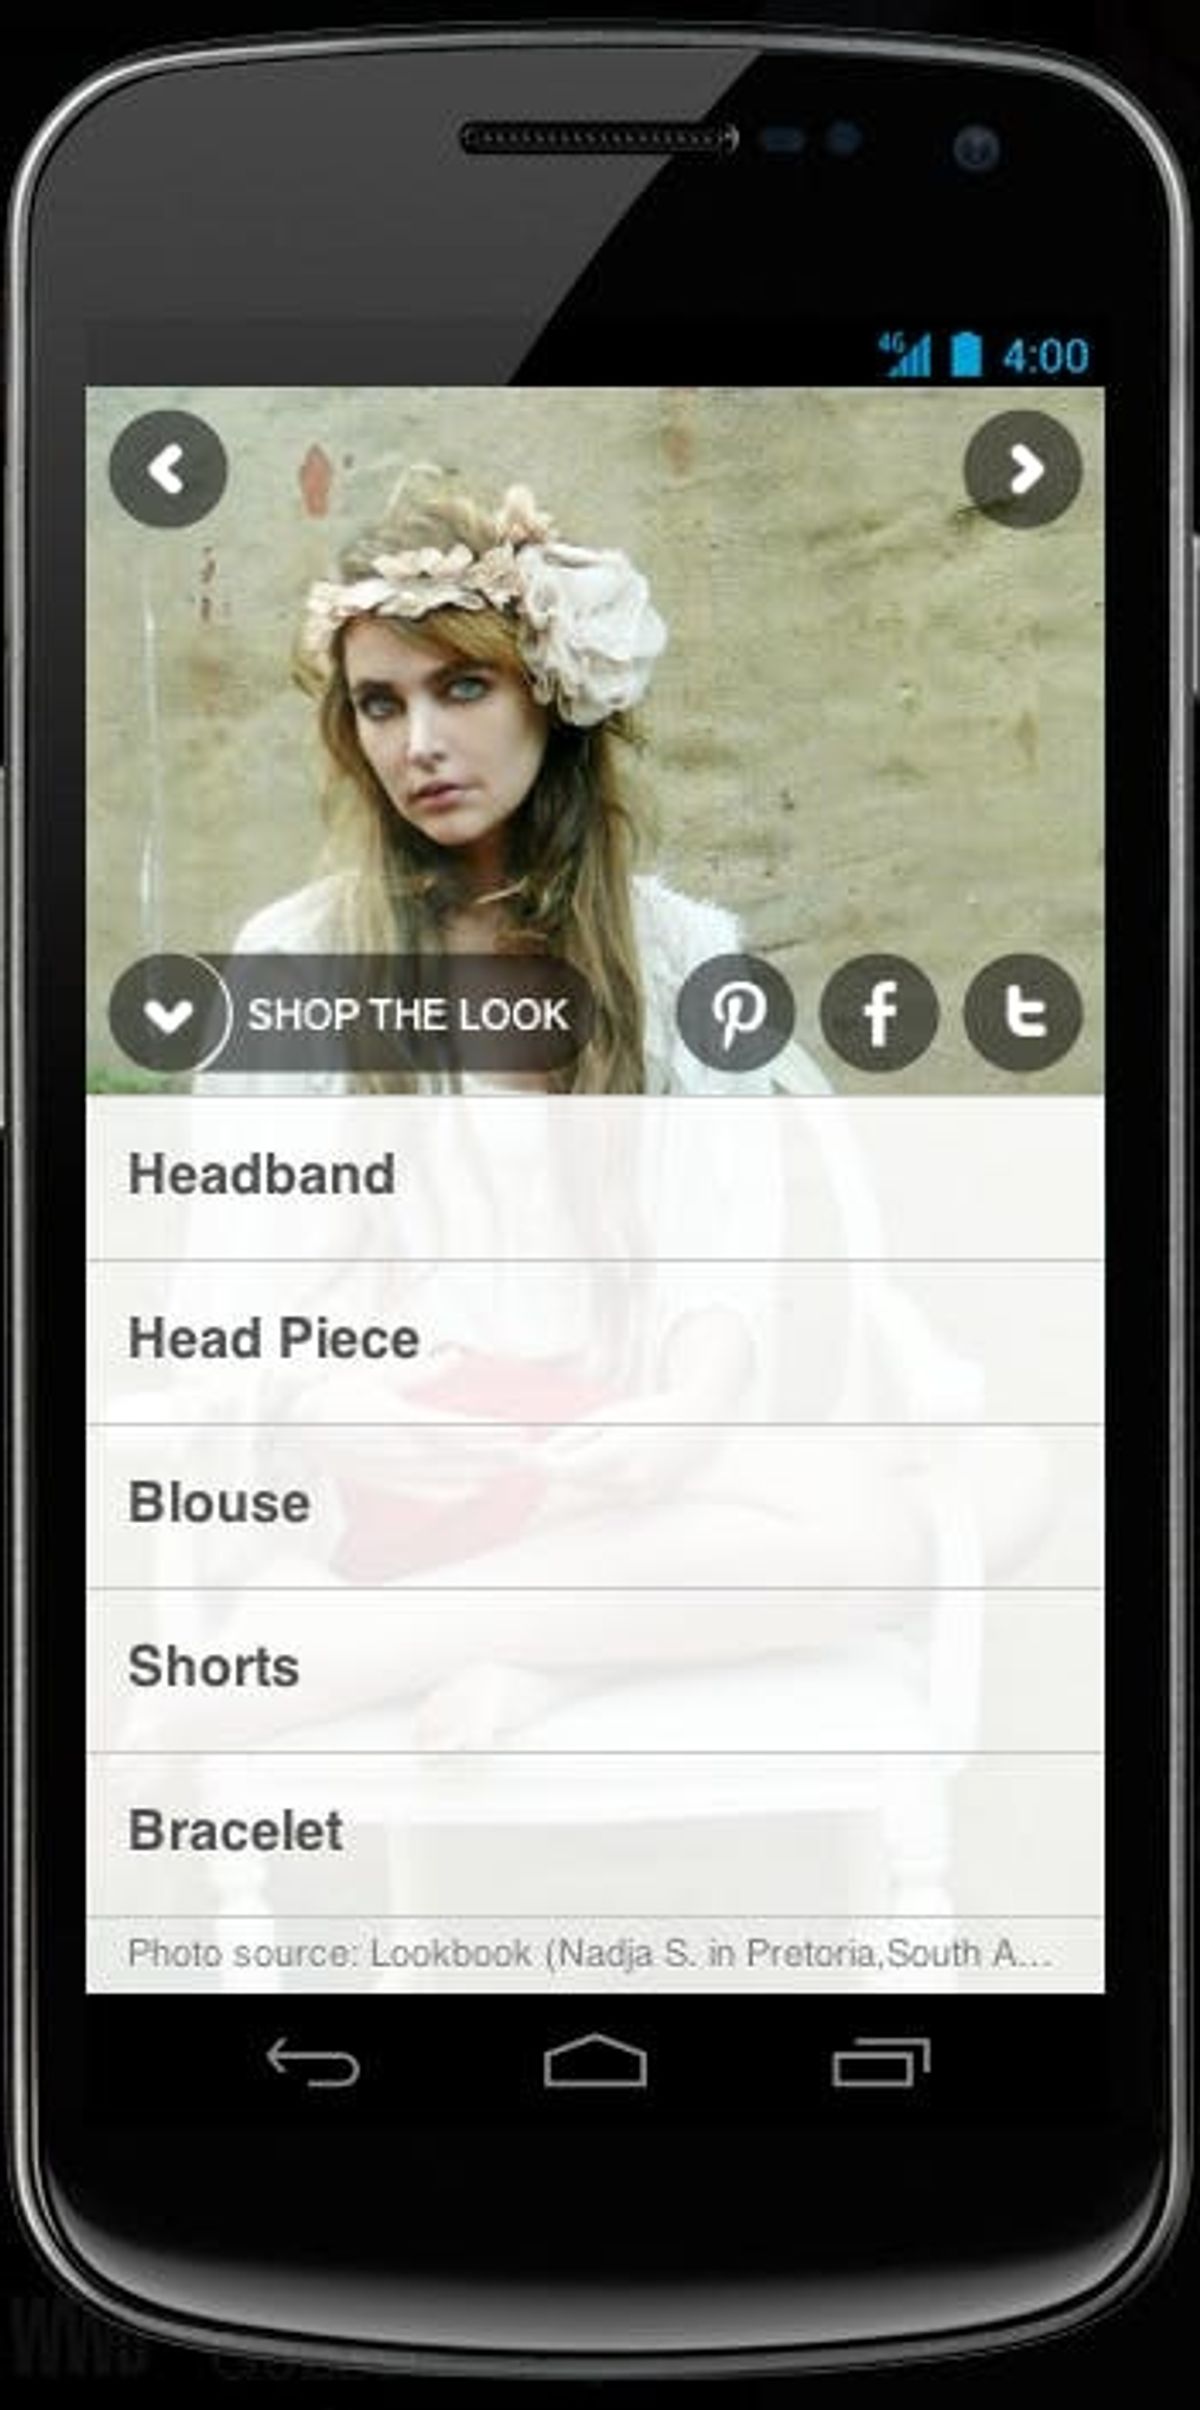 Kaleidoscope Lets You Shop by Outfit from Your Phone